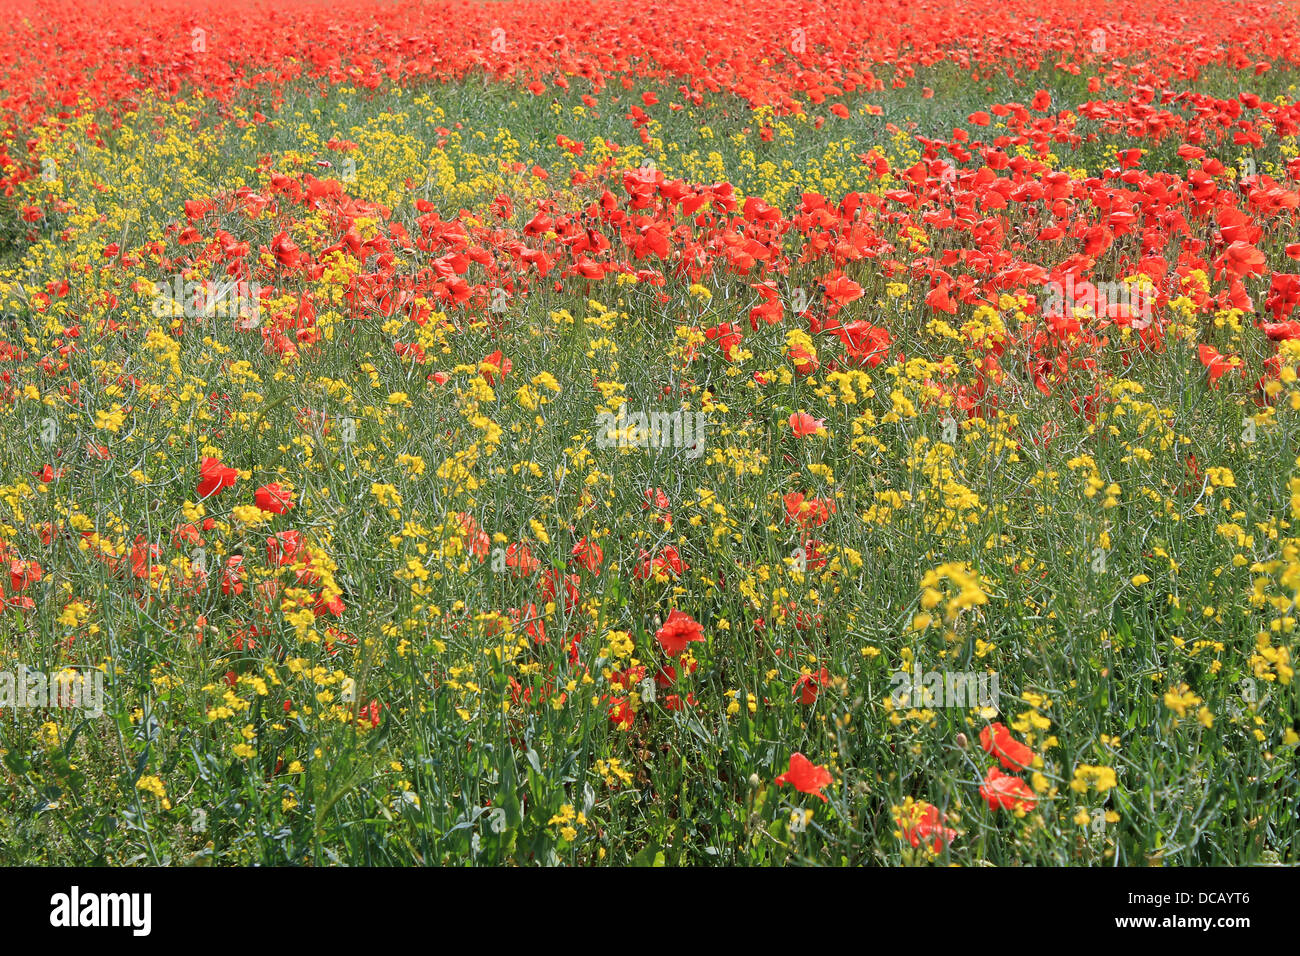 Background of red and yellow poppy flowers in bloom. Stock Photo